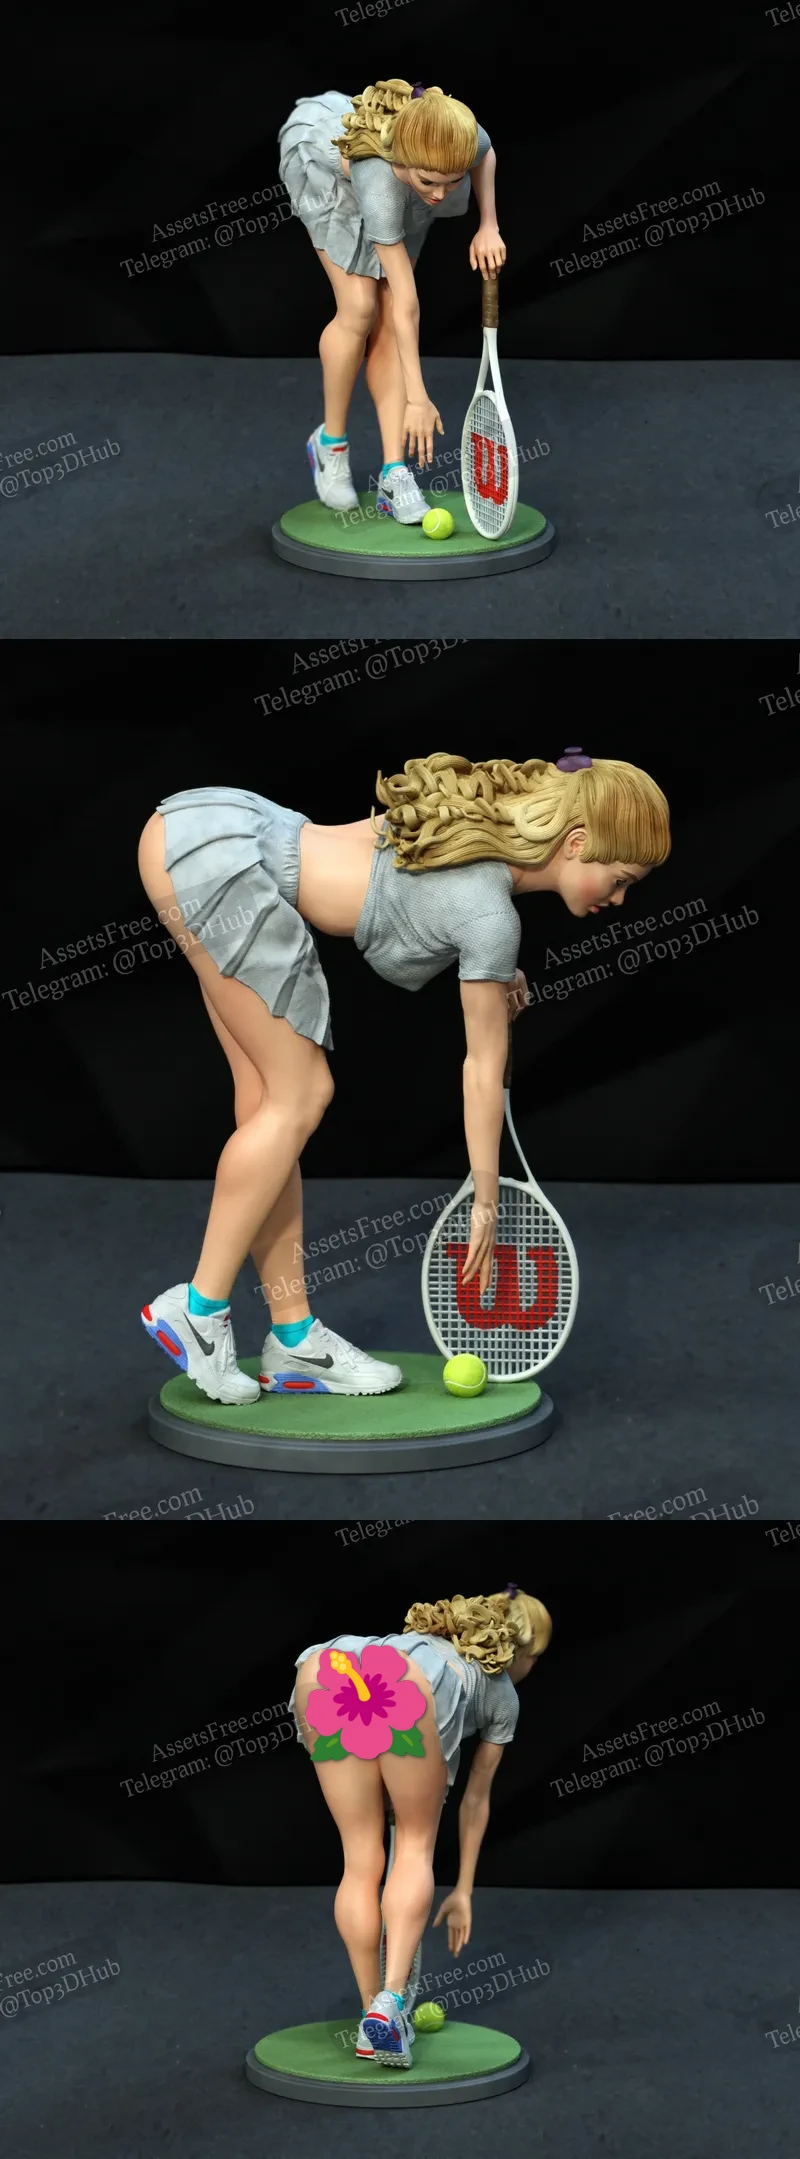 Tennis player girl in pin-up style